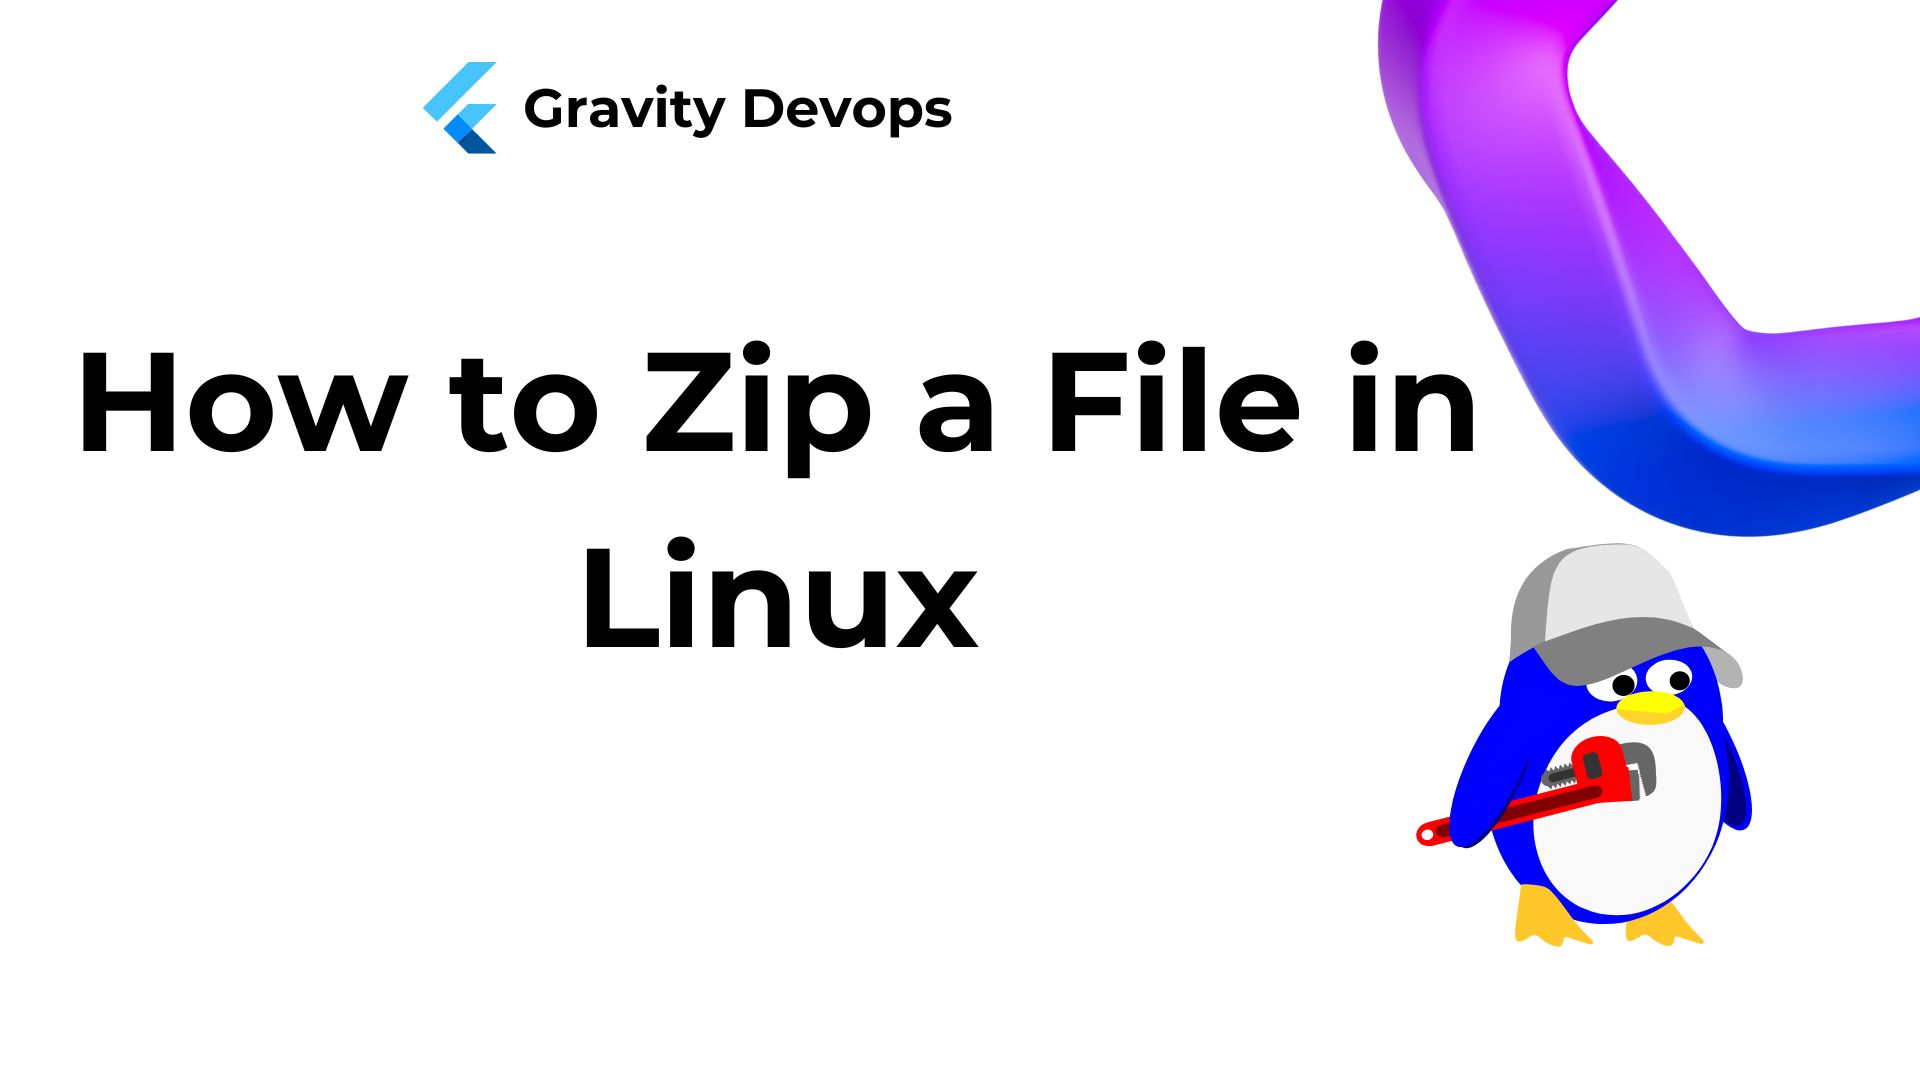 How to Zip a File in Linux